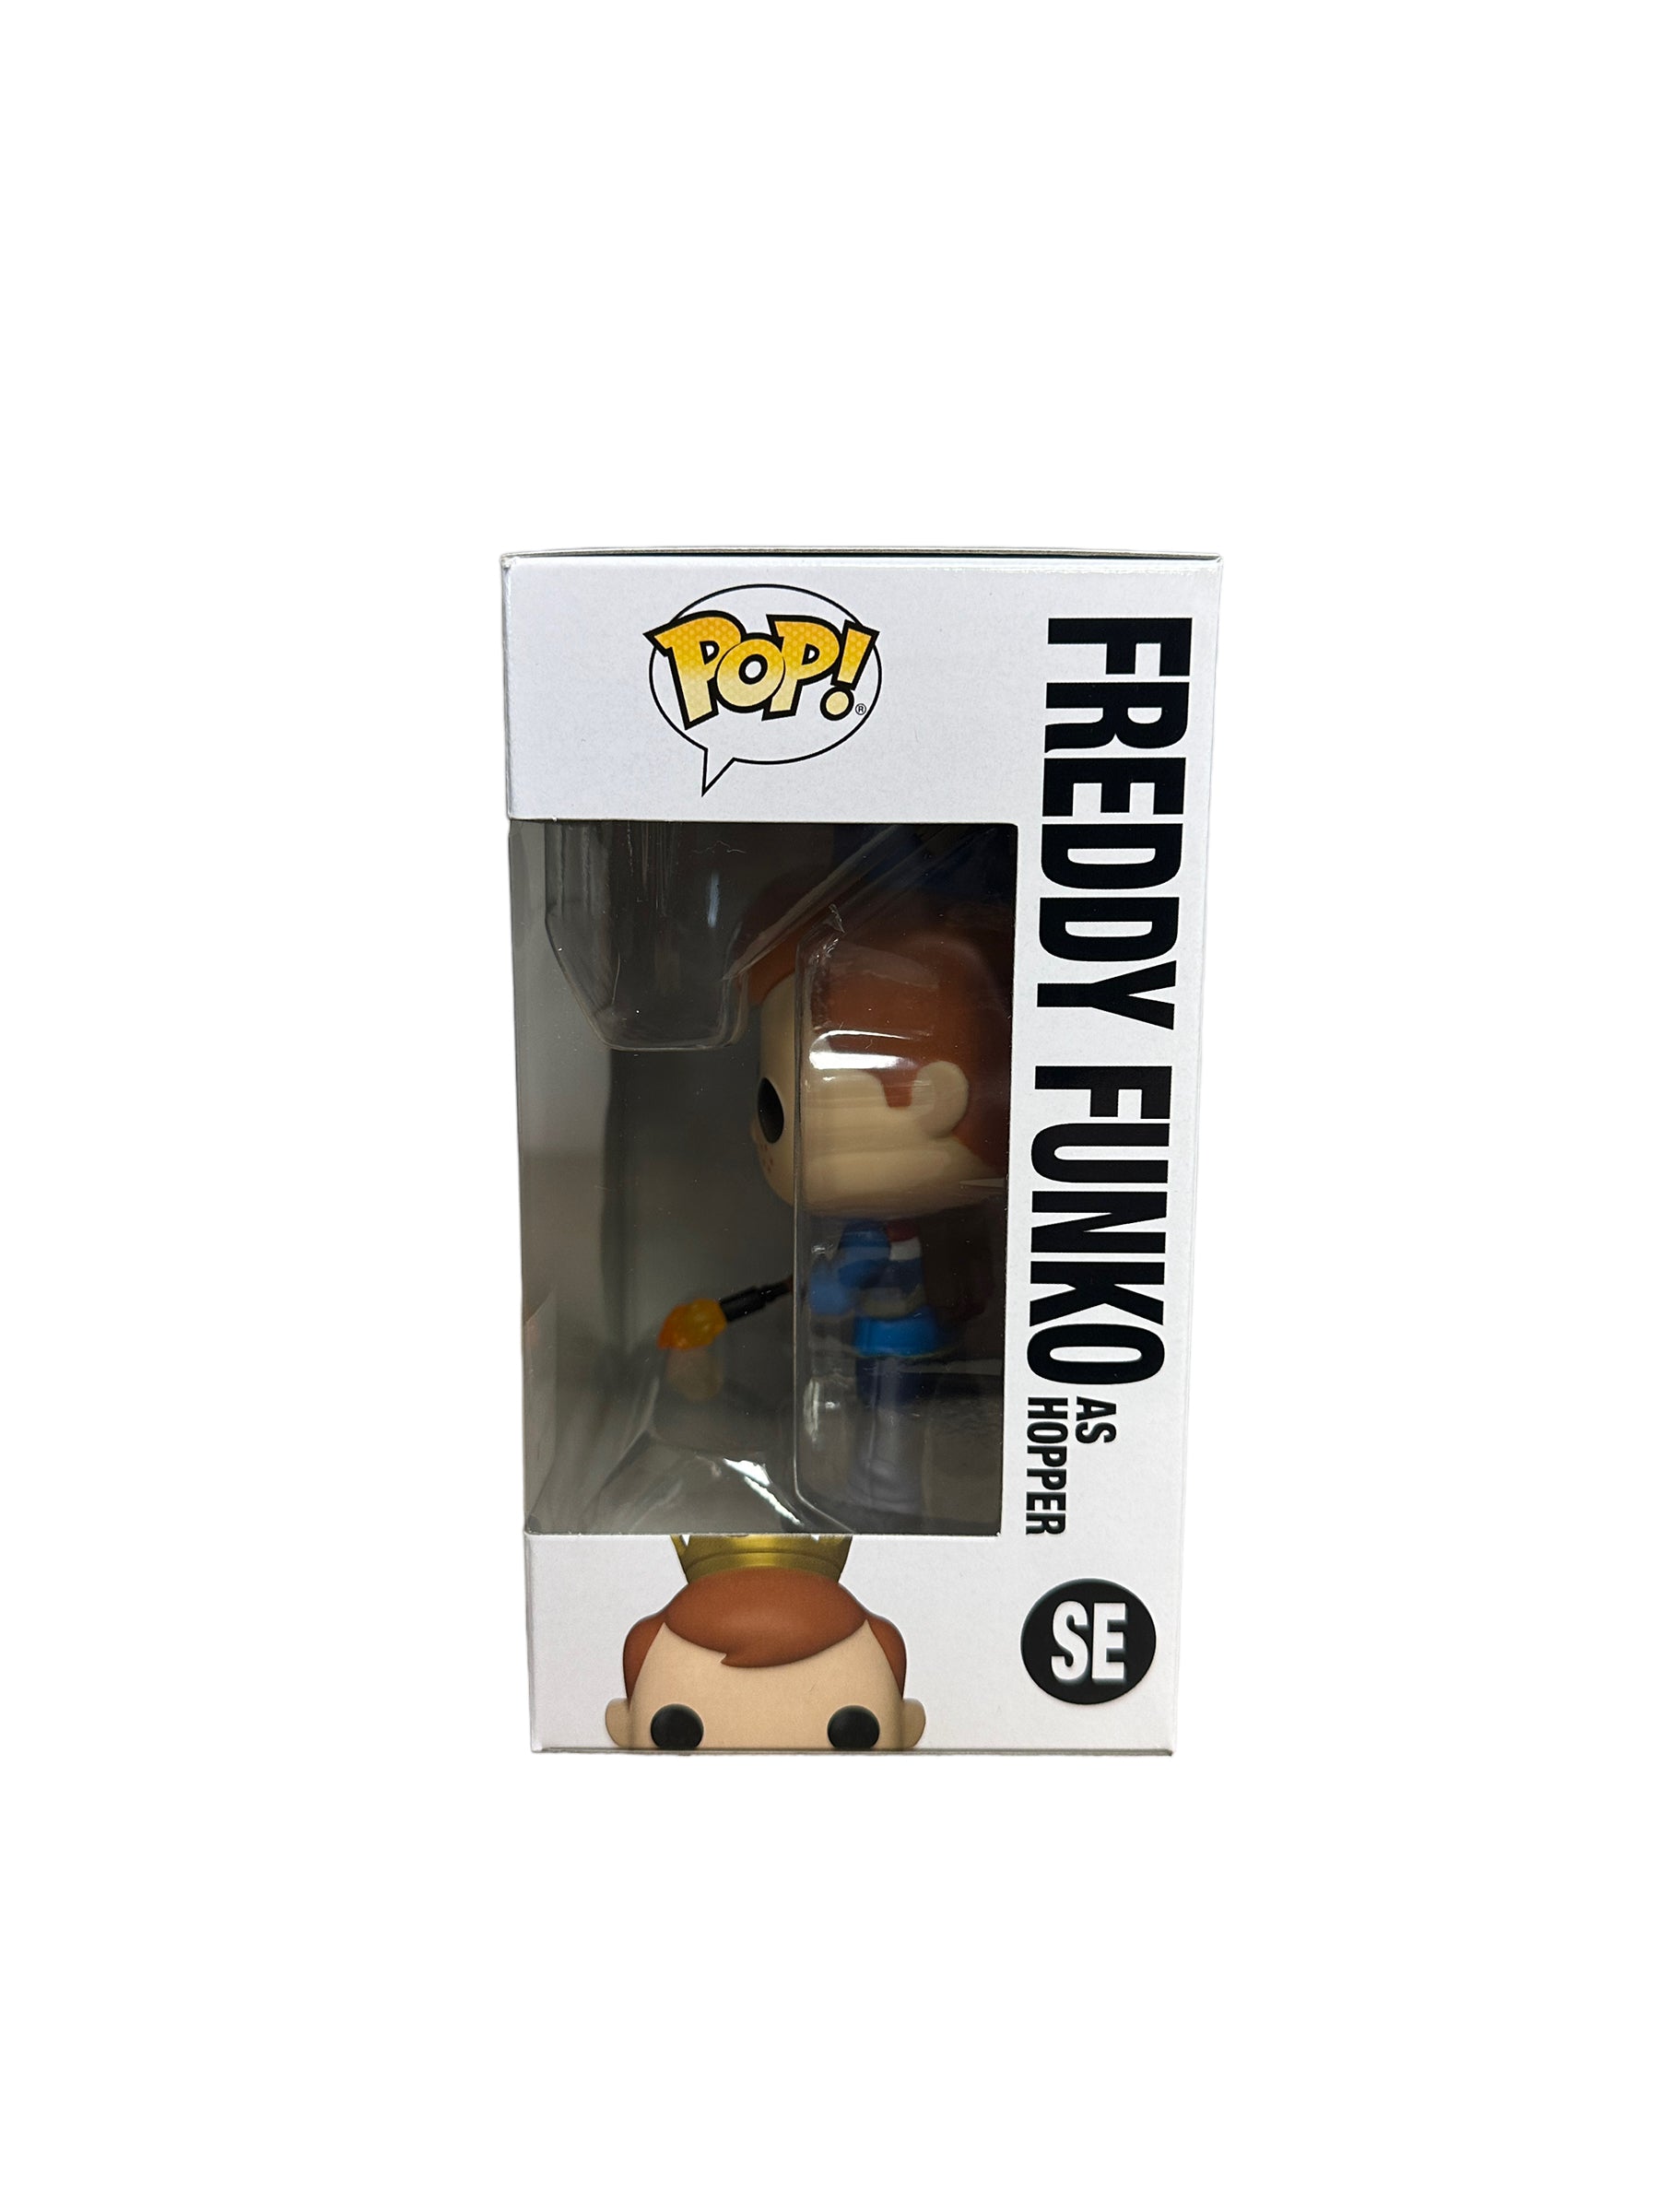 Freddy Funko as Hopper Funko Pop! - Stranger Things - Camp Fundays 2023 Exclusive LE2500 Pcs - Condition 8.75/10